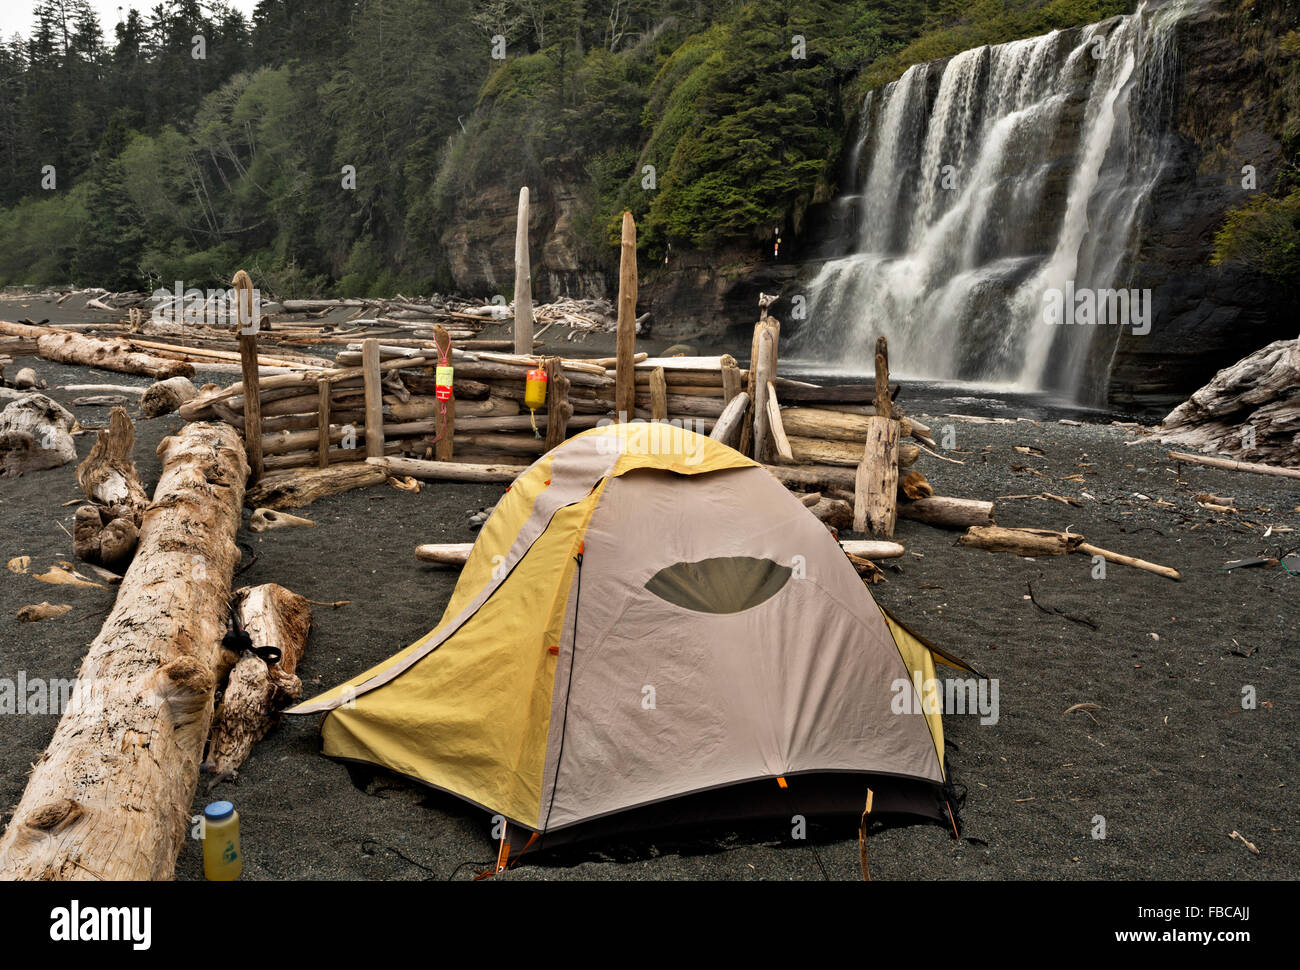 BRITISH COLUMBIA- Campsite at Tsusiat Falls in the West Coast Trail section of the Pacific Rim National Park on Vancouver Island Stock Photo